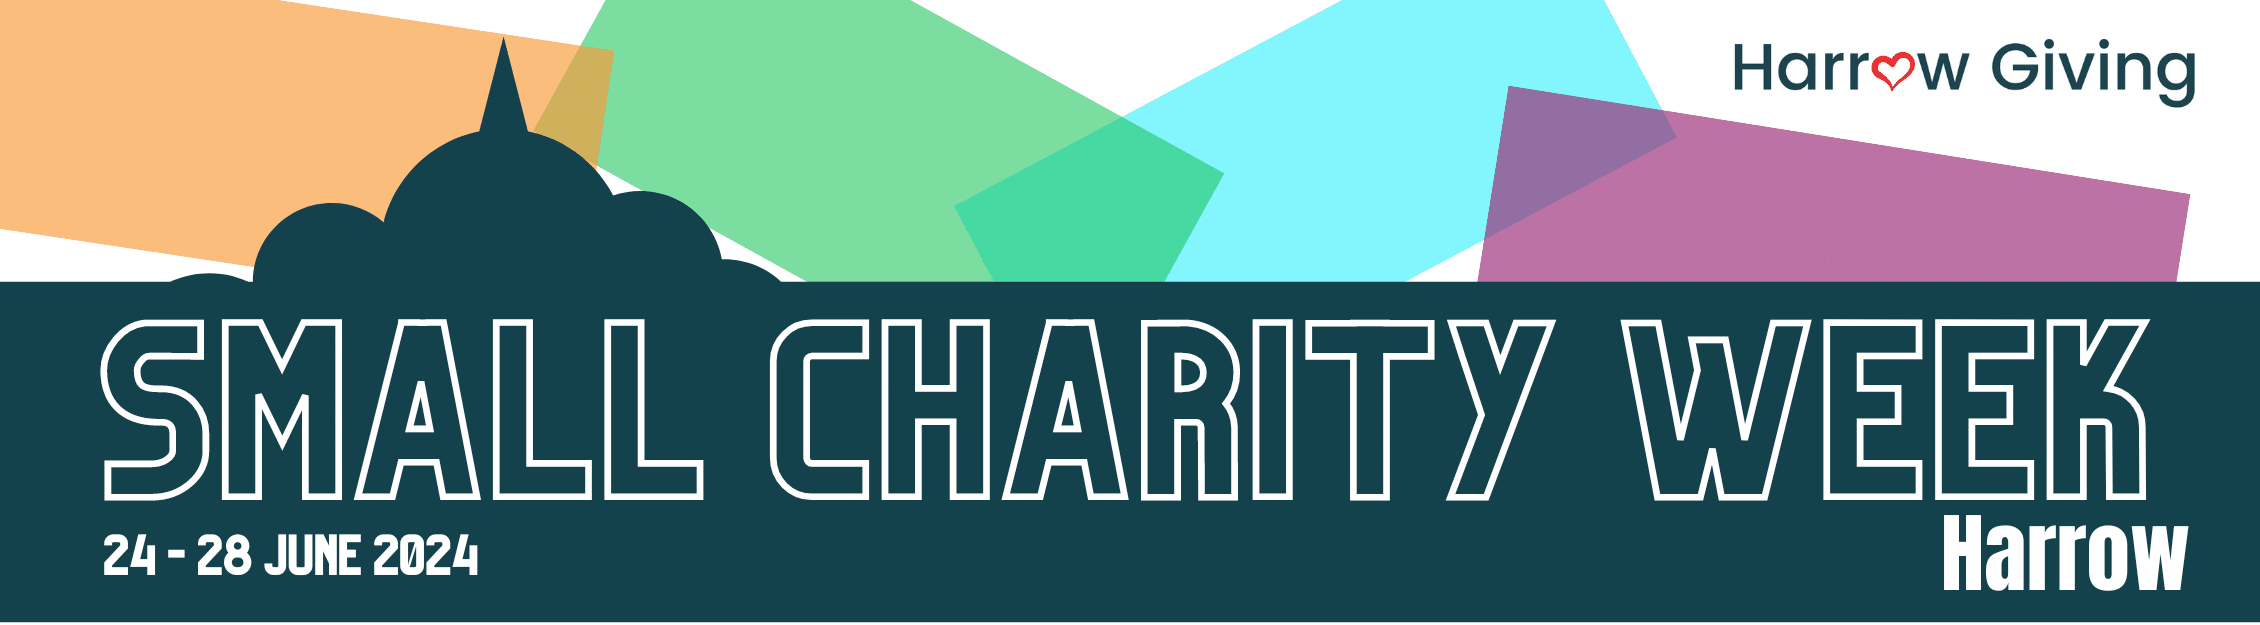 Small Charity Week banner